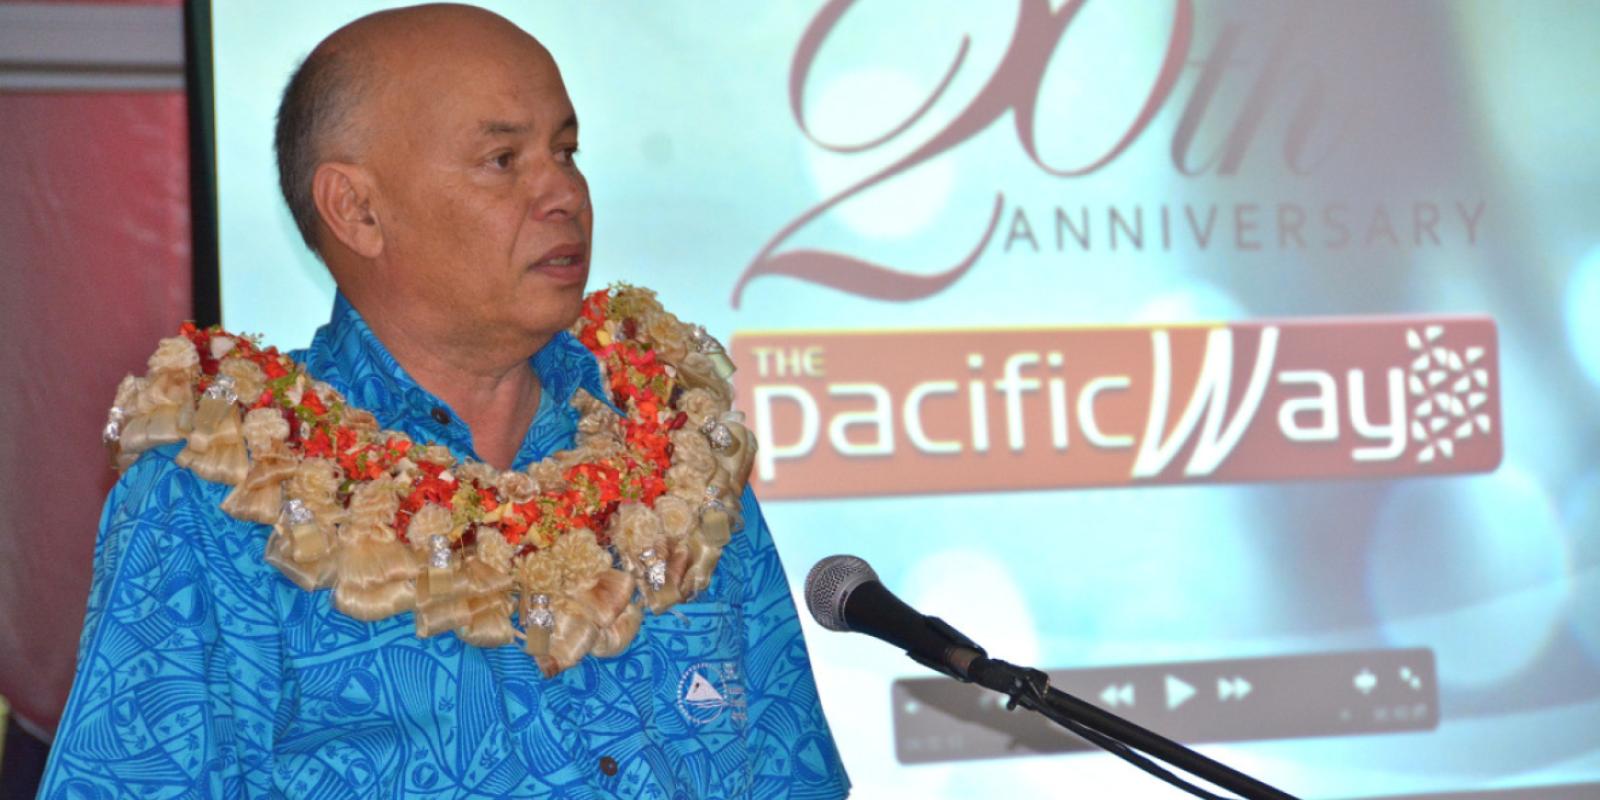 The Pacific Way 20th anniversary celebration in September 2015, with our Director-General, Colin Tukuitonga